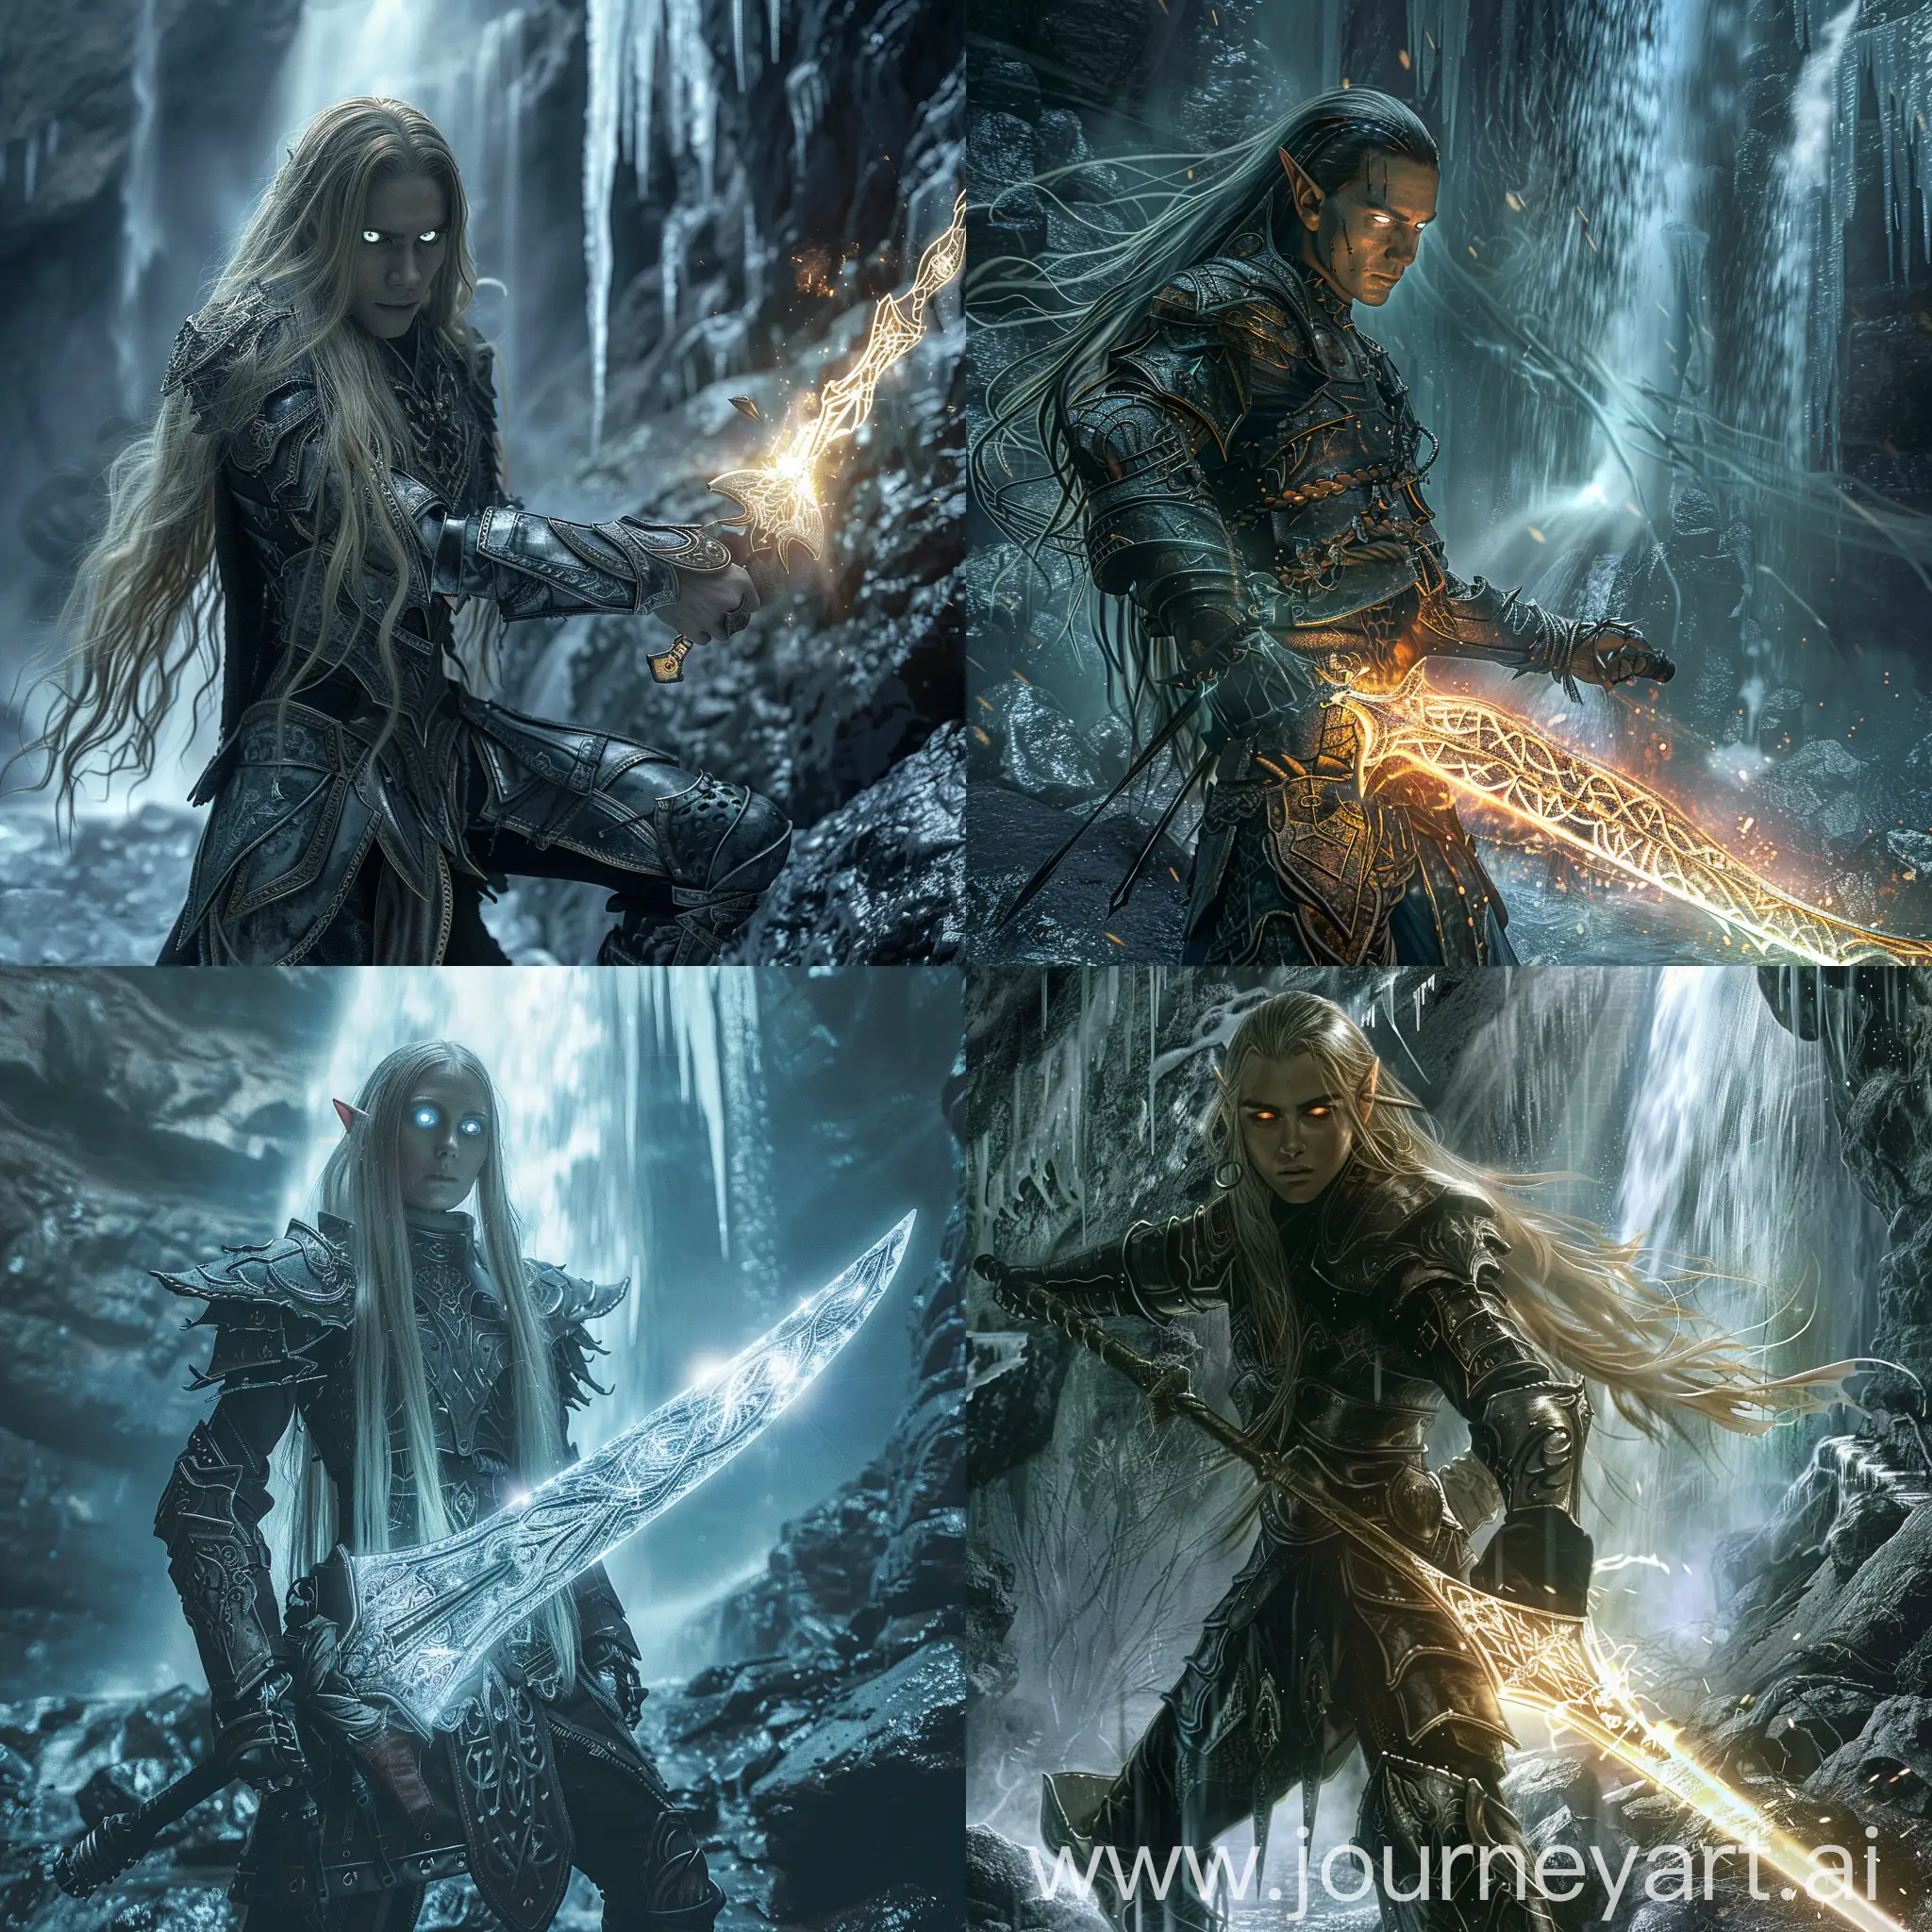 AshenHaired-Elf-Warrior-Battling-in-Icy-Waterfall-Cave